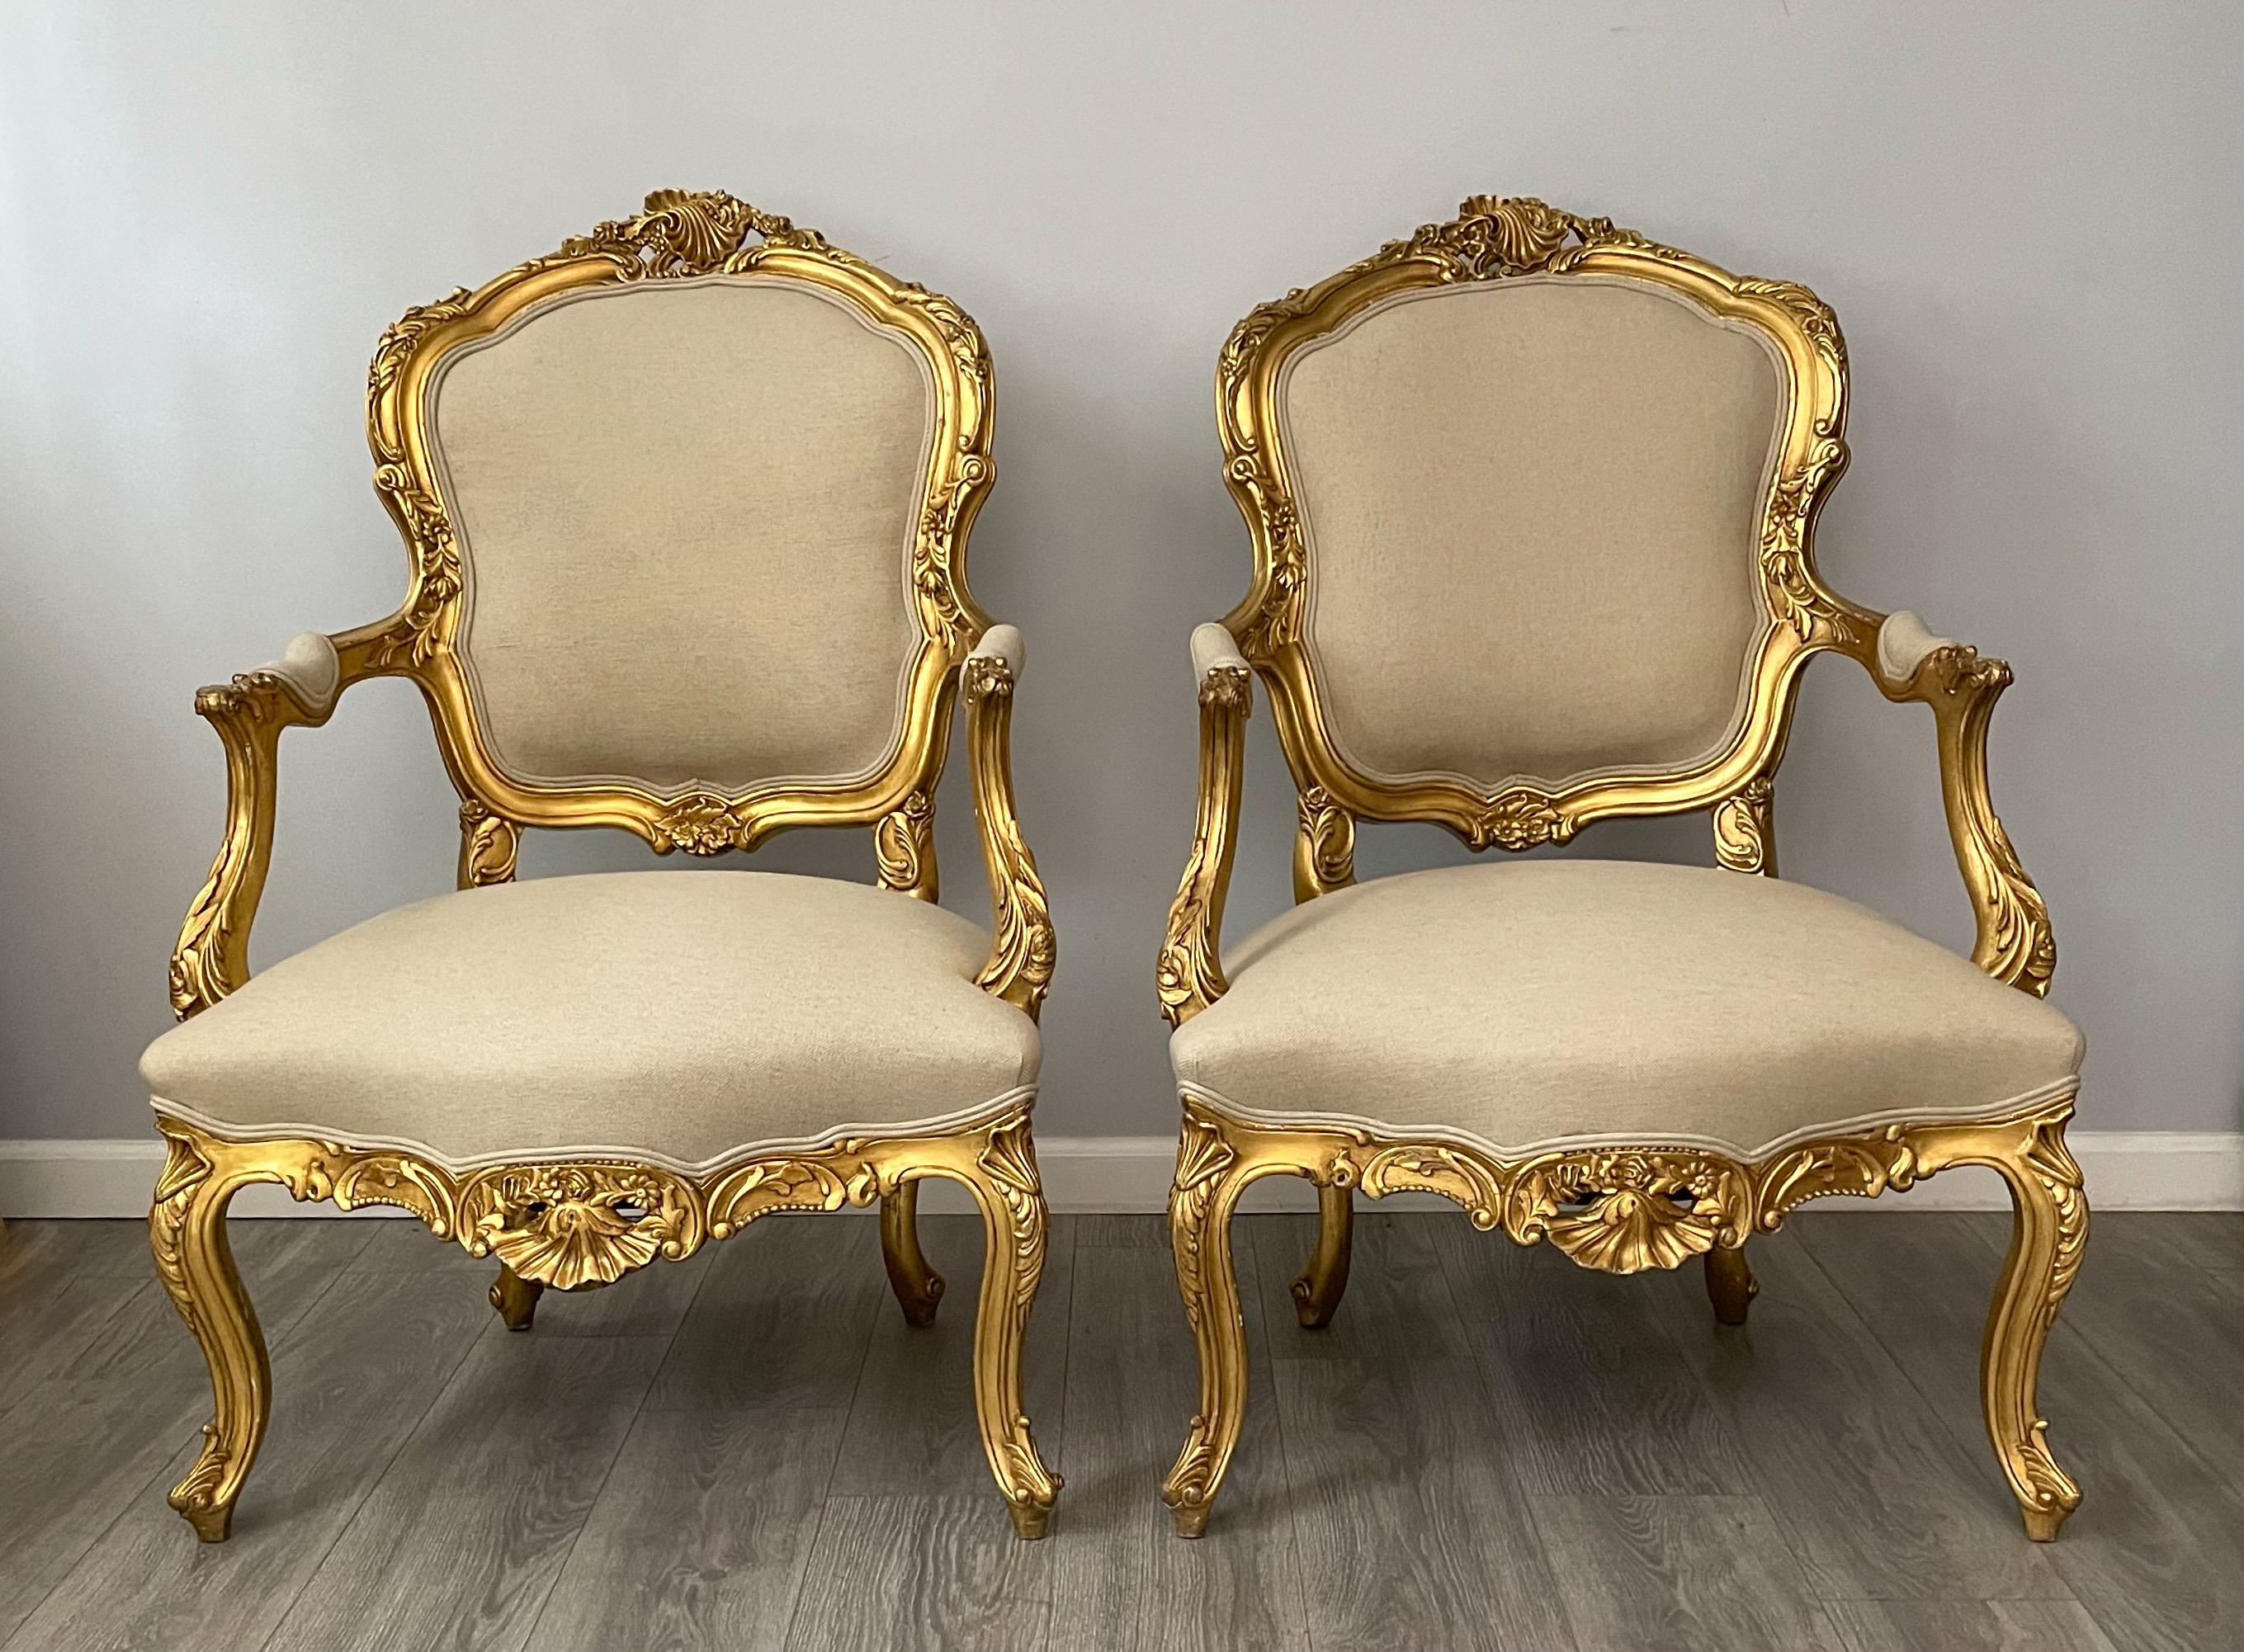 Fabulous, Italian 1940s pair of armchairs in the Rococo style. 

Each of the chairs consists of beautifully carved gilt-wood frame and new Belgian linen upholstery. 

Minor gilt loss consistent with age. The chairs are sturdy and comfortable,